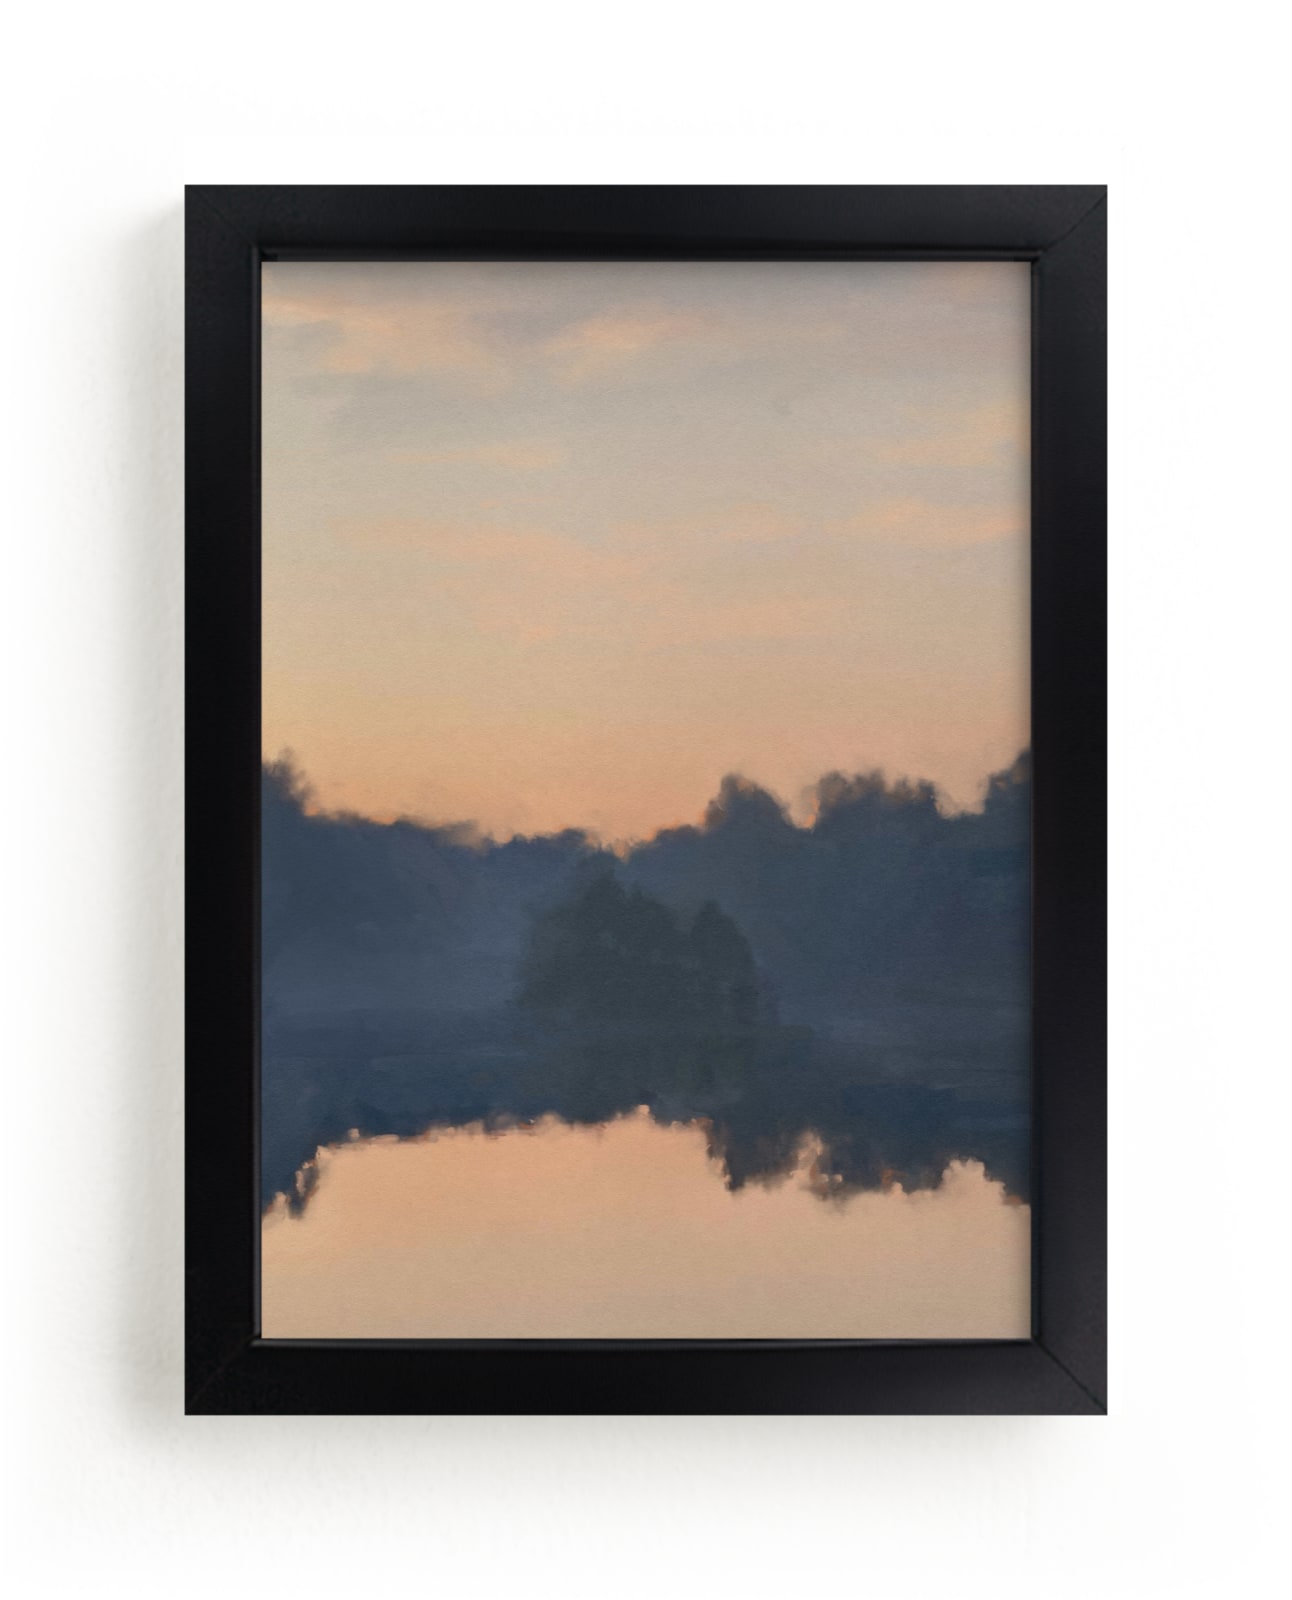 Reflection at Sunset Fine Art Prints by Christa Kimble | Minted